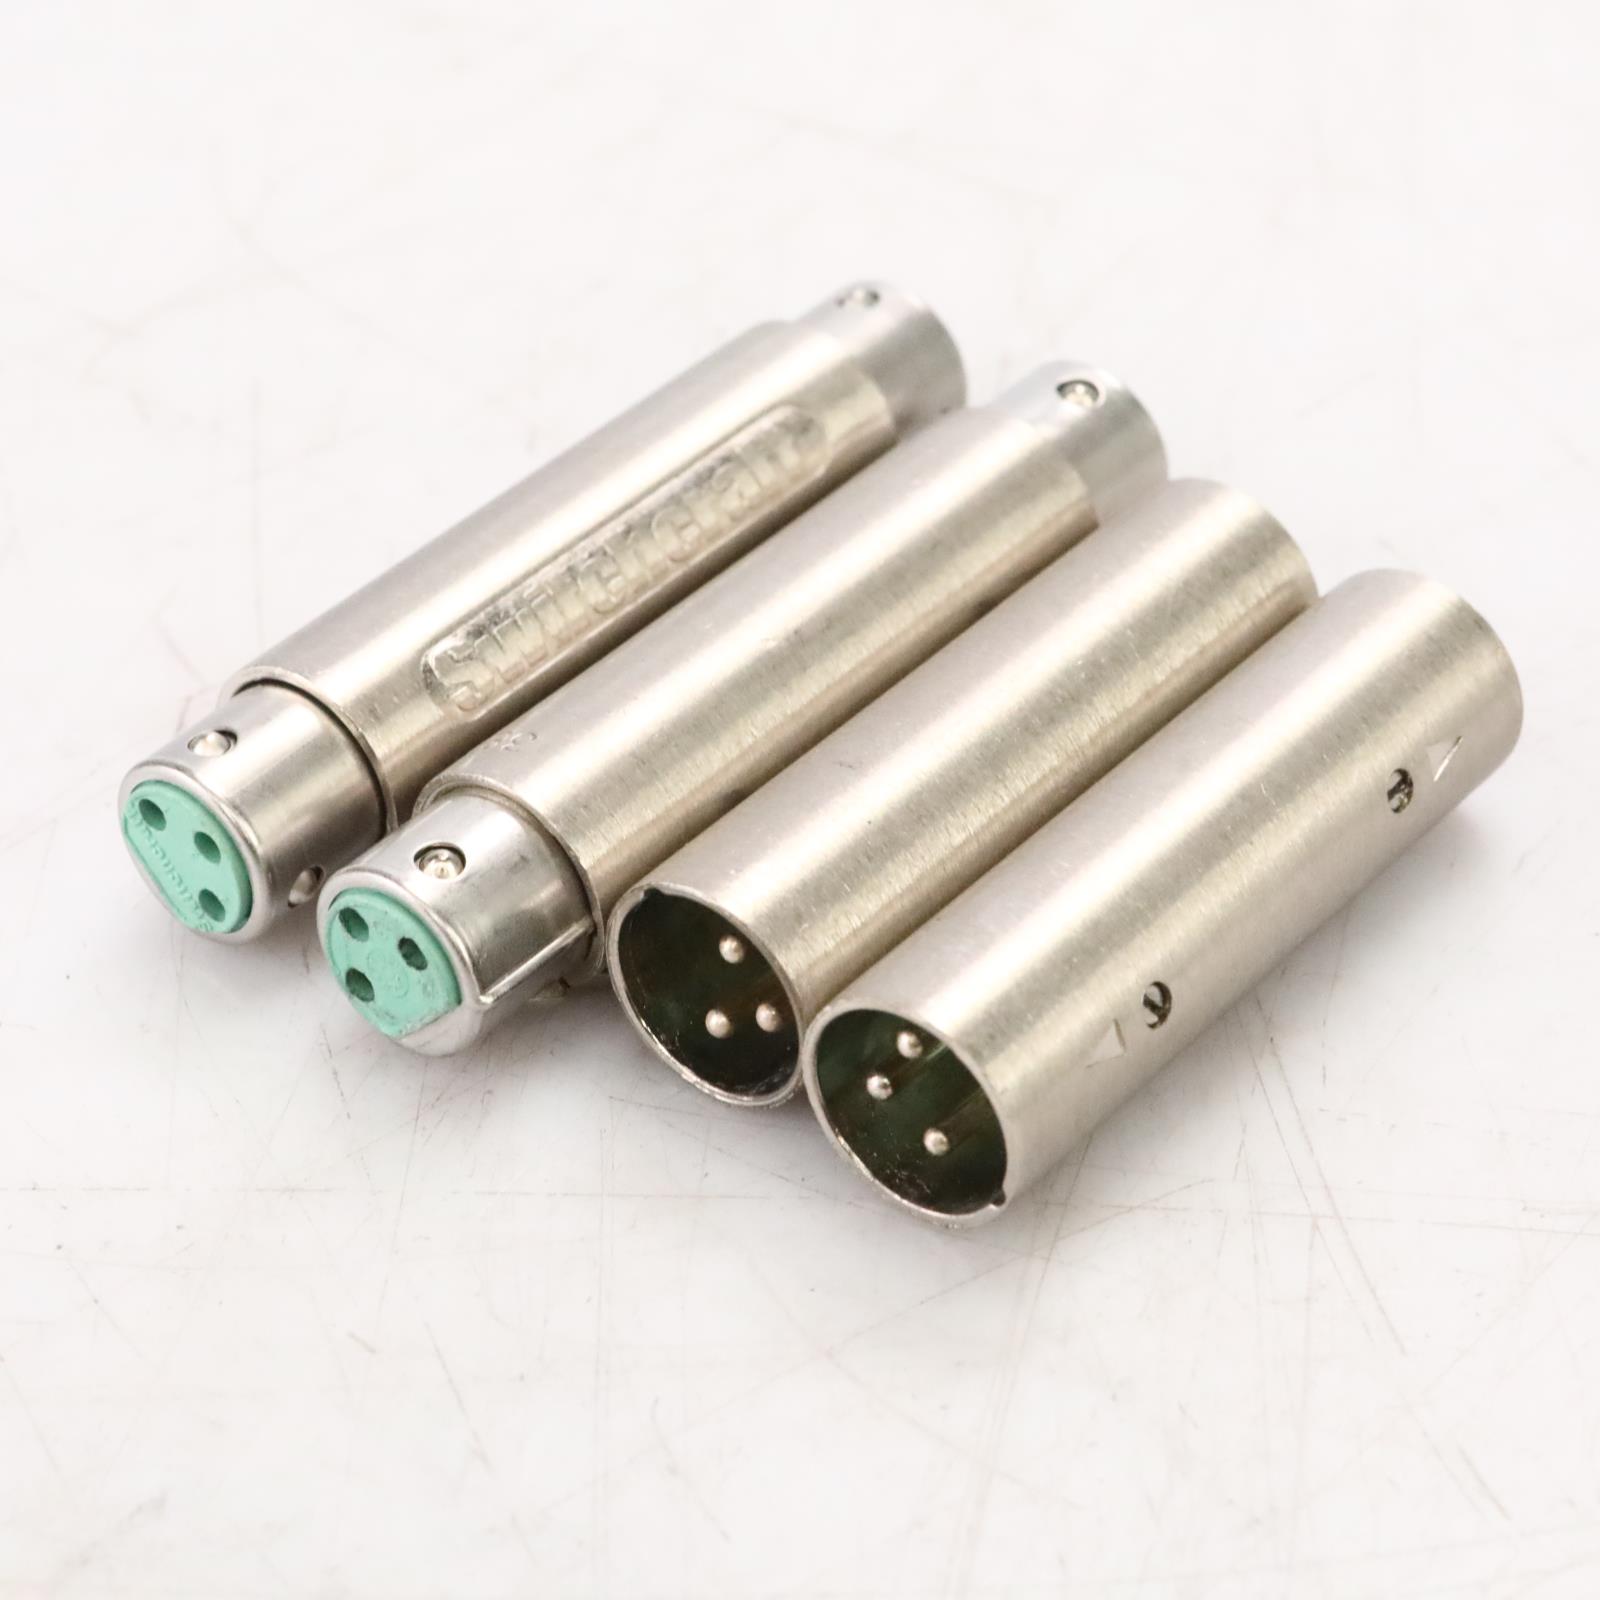 2 Switchcraft 390 XLR Male to Male & 2 389 XLR Female to Female Adapters #46785